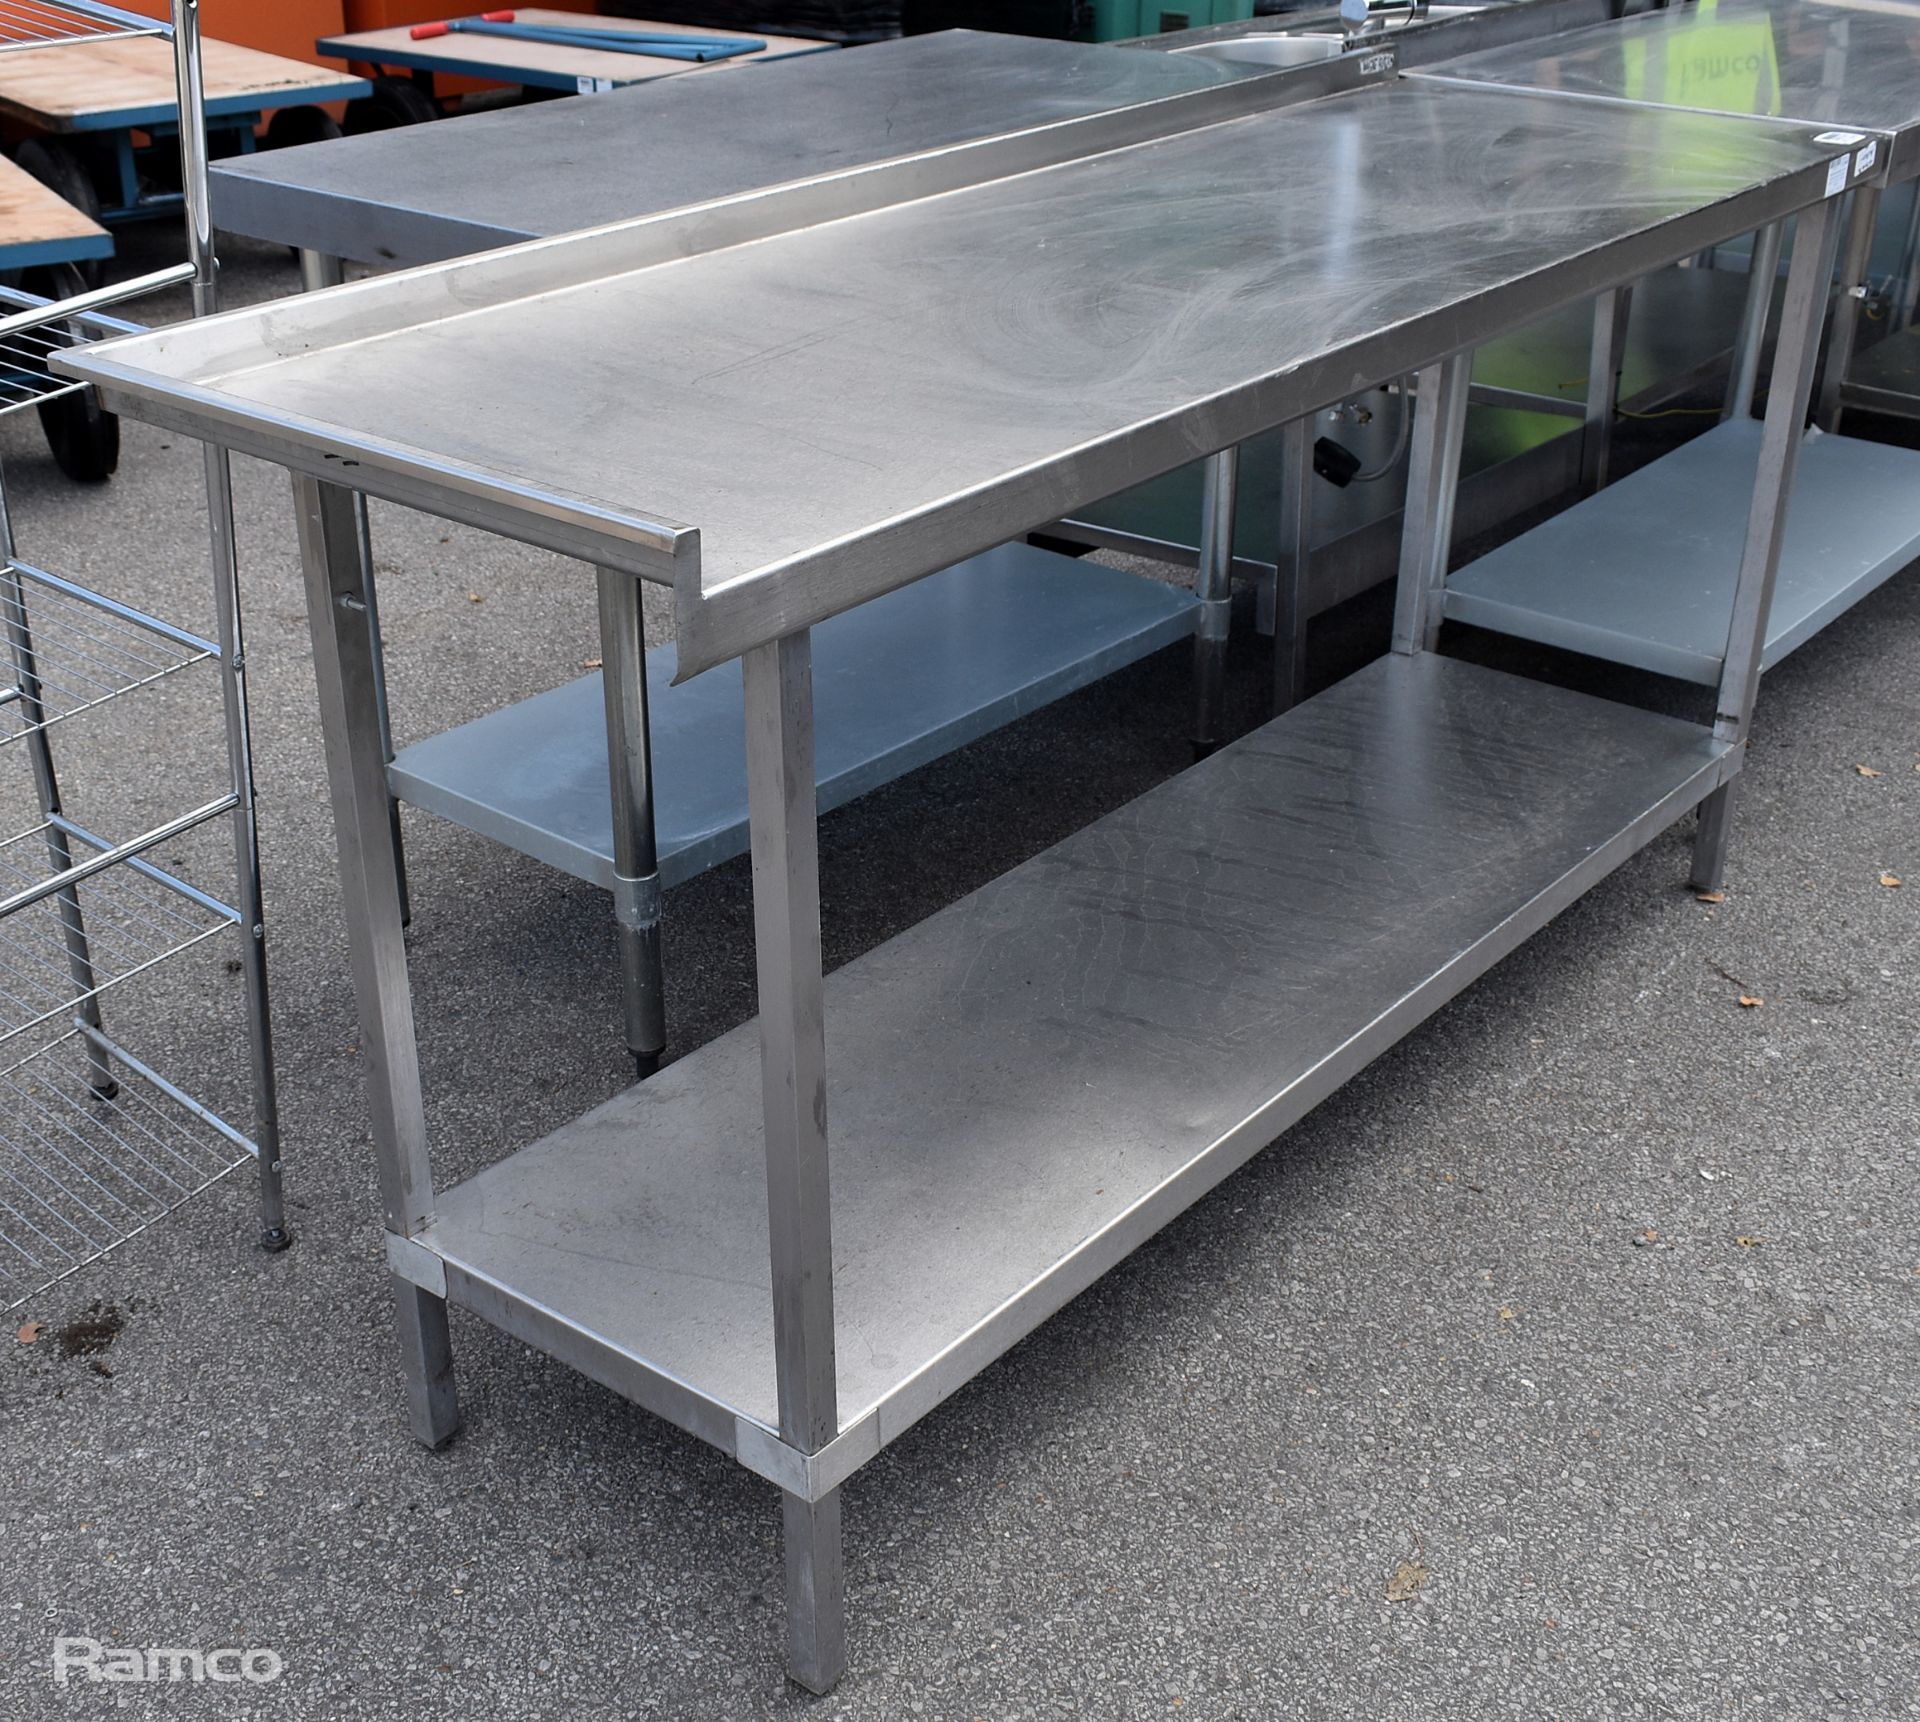 Moffat stainless steel prep table with lower shelf - W 1800 x D 600 x H 930mm - Image 2 of 3